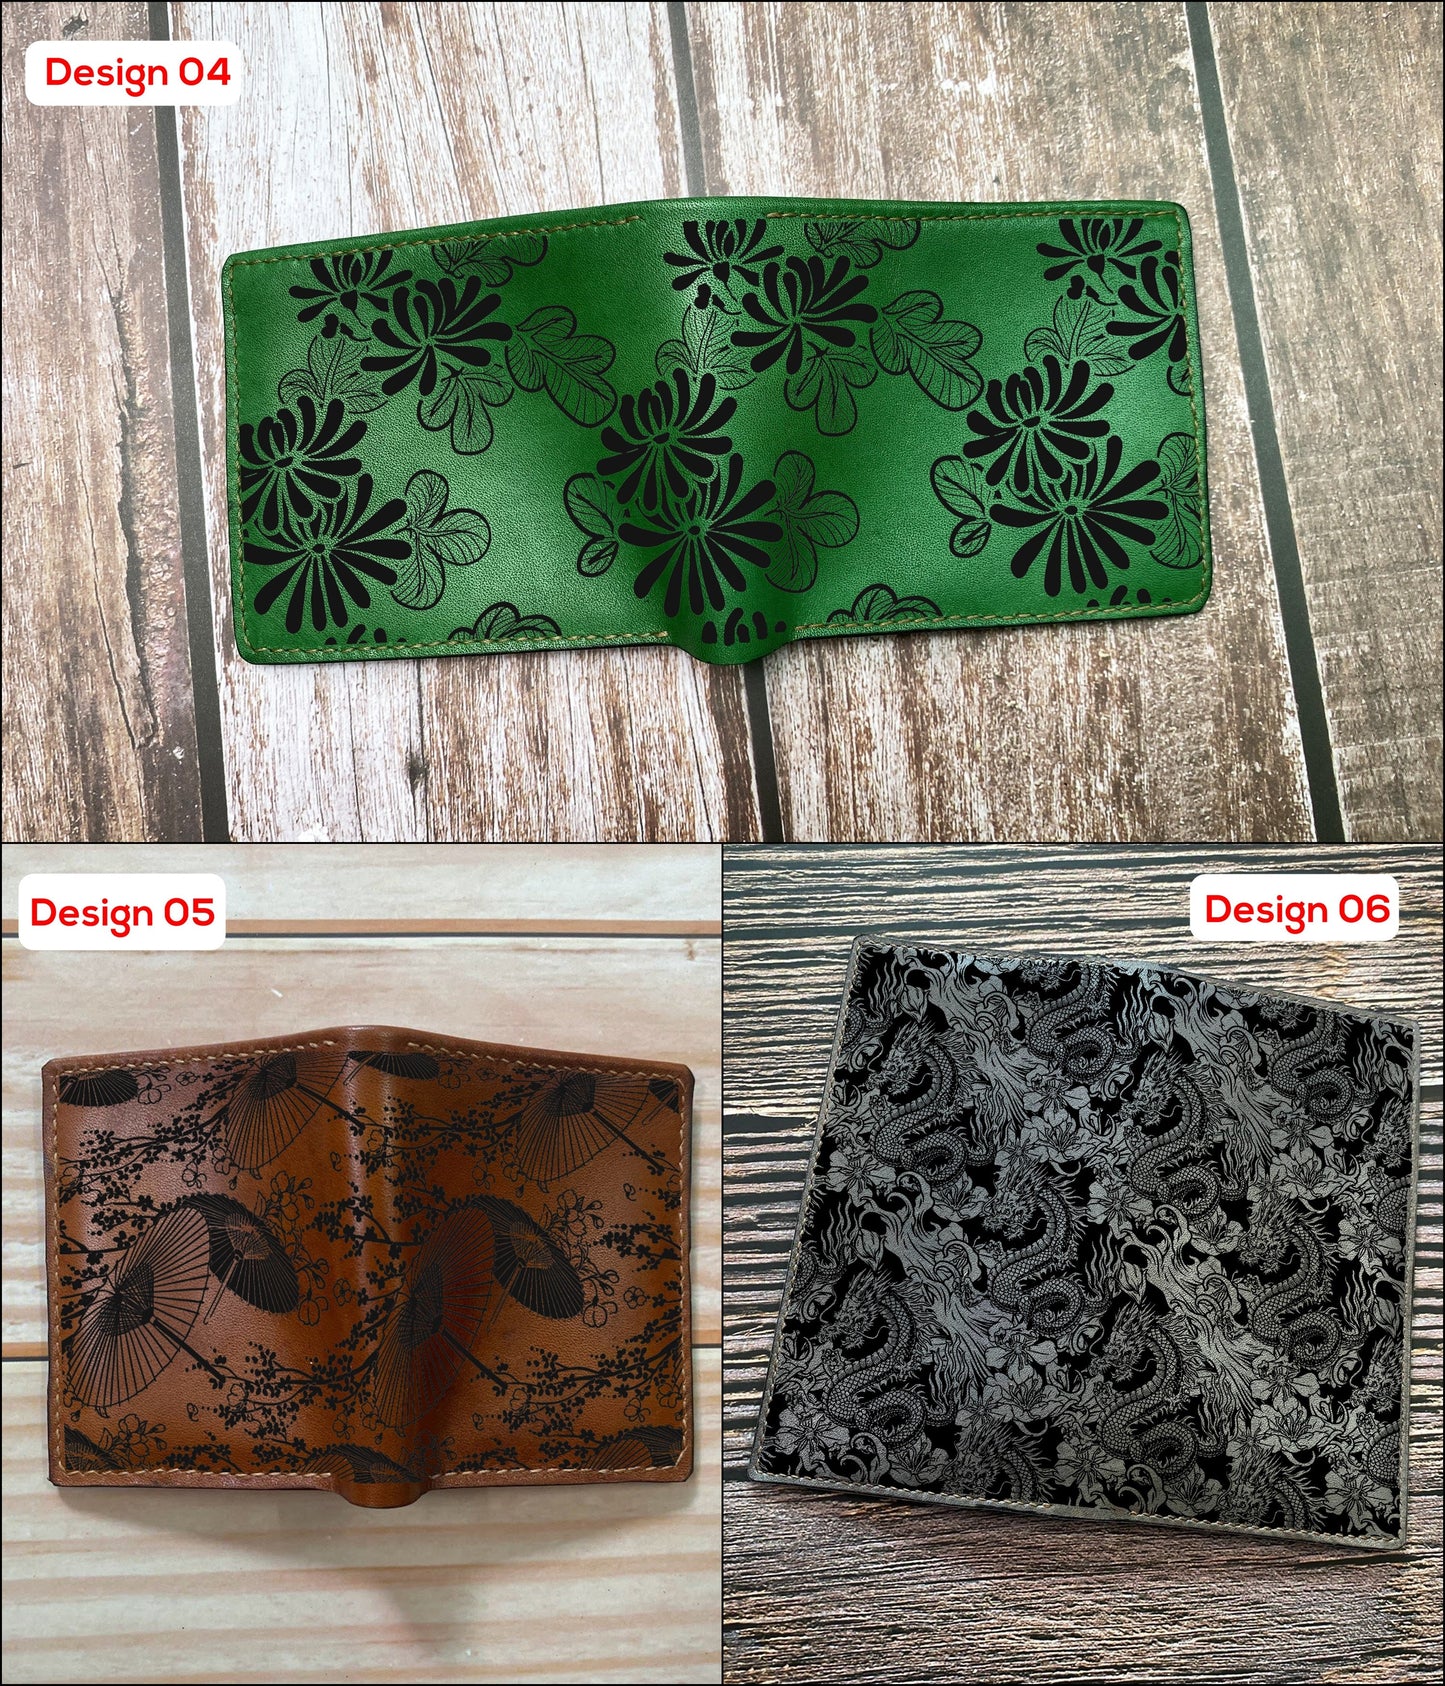 Mayan Corner - Eastern dragon pattern leather bifold long wallet, customized Japan pattern wallet, leather gift for him, leather anniversary present